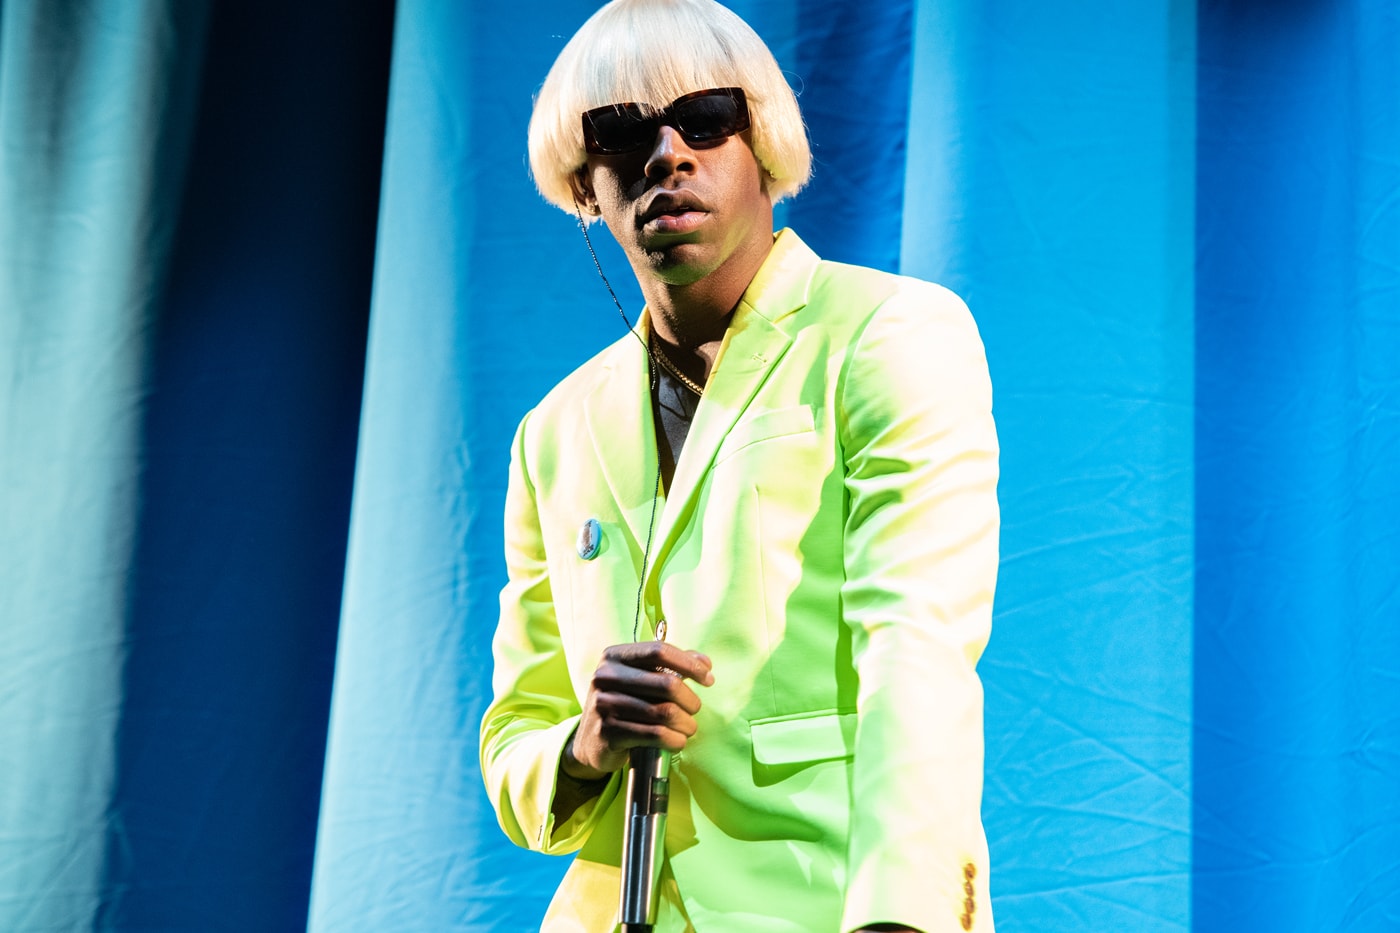 tyler-the-creator-the-internet-special-affaircurse-video